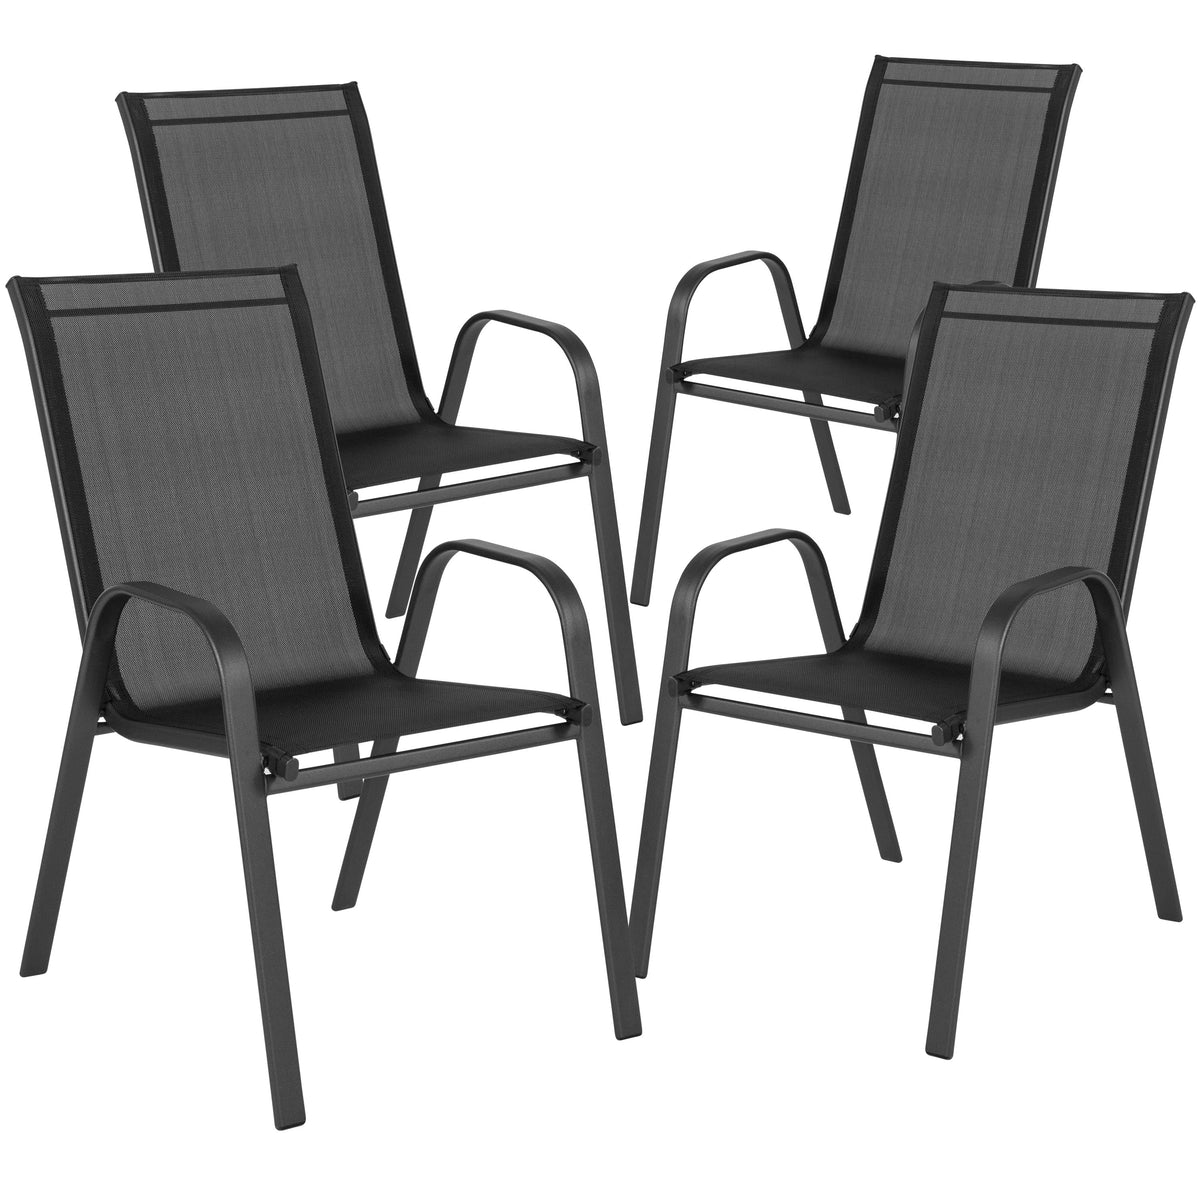 Black |#| 5 Piece Patio Dining Set - 55inch Glass Patio Table, 4 Black Flex Stack Chairs